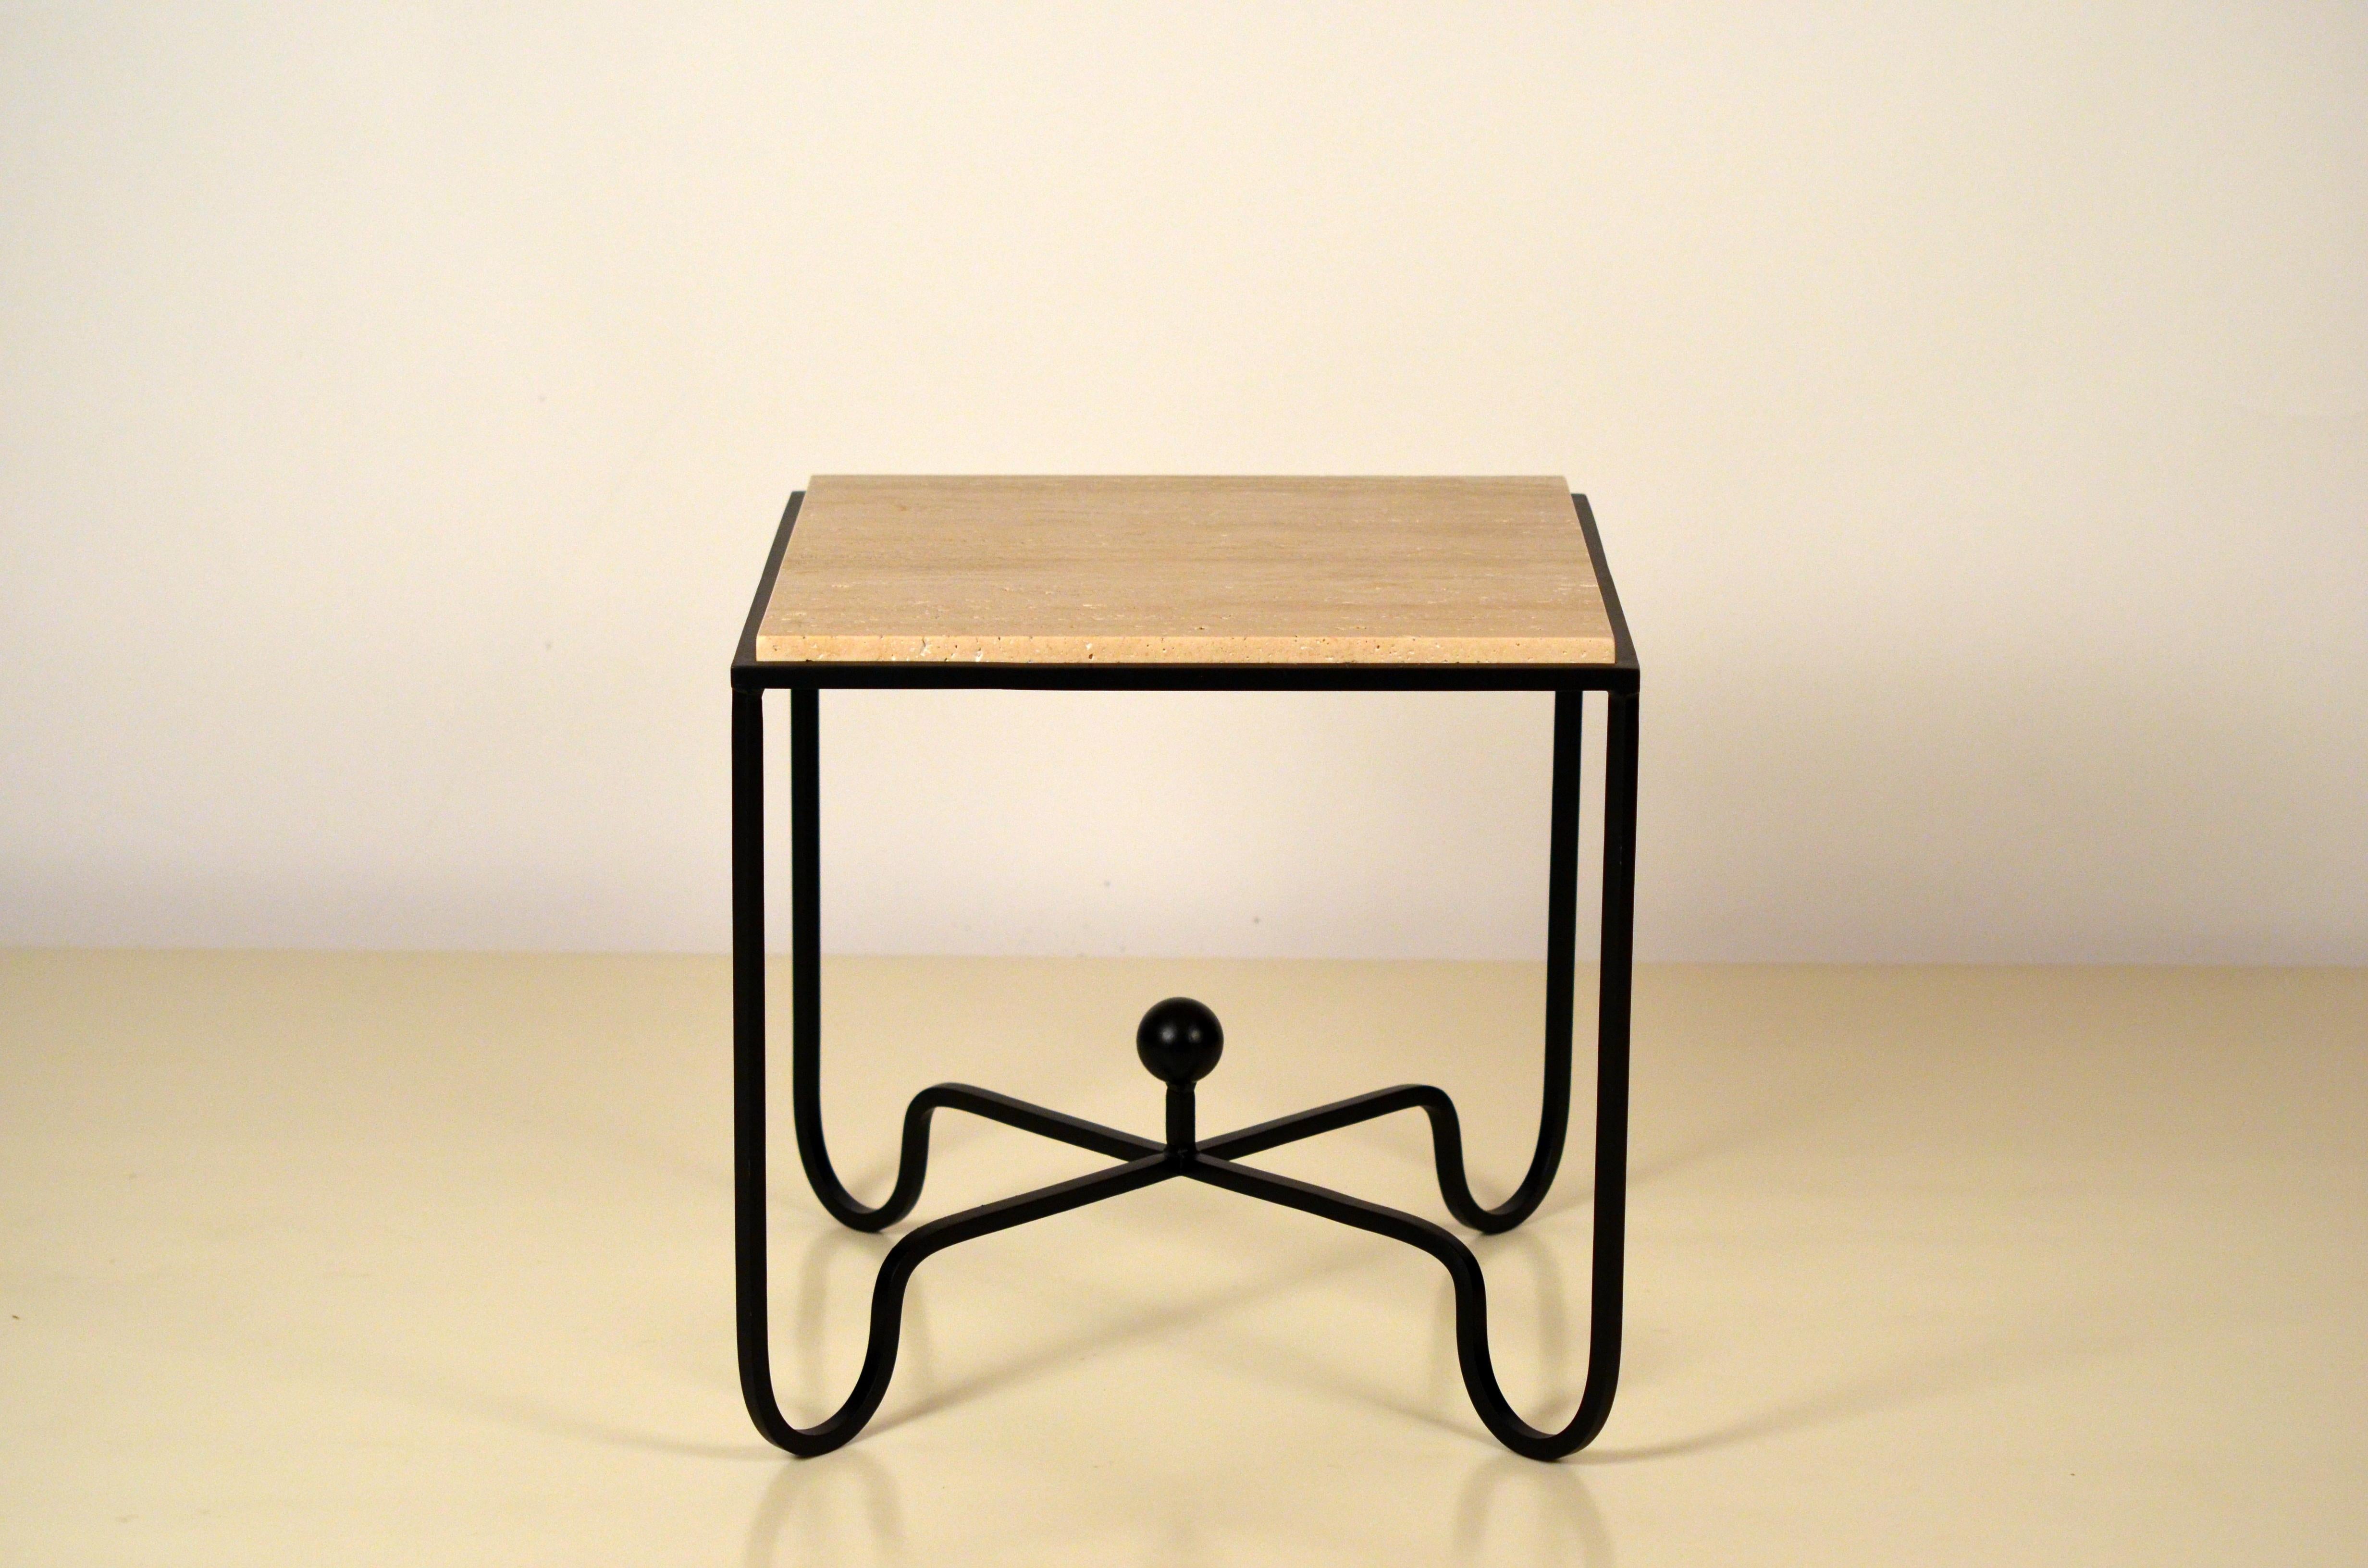 Pair of Wrought Iron and Travertine 'Entretoise' Side Tables by Design Frères For Sale 3